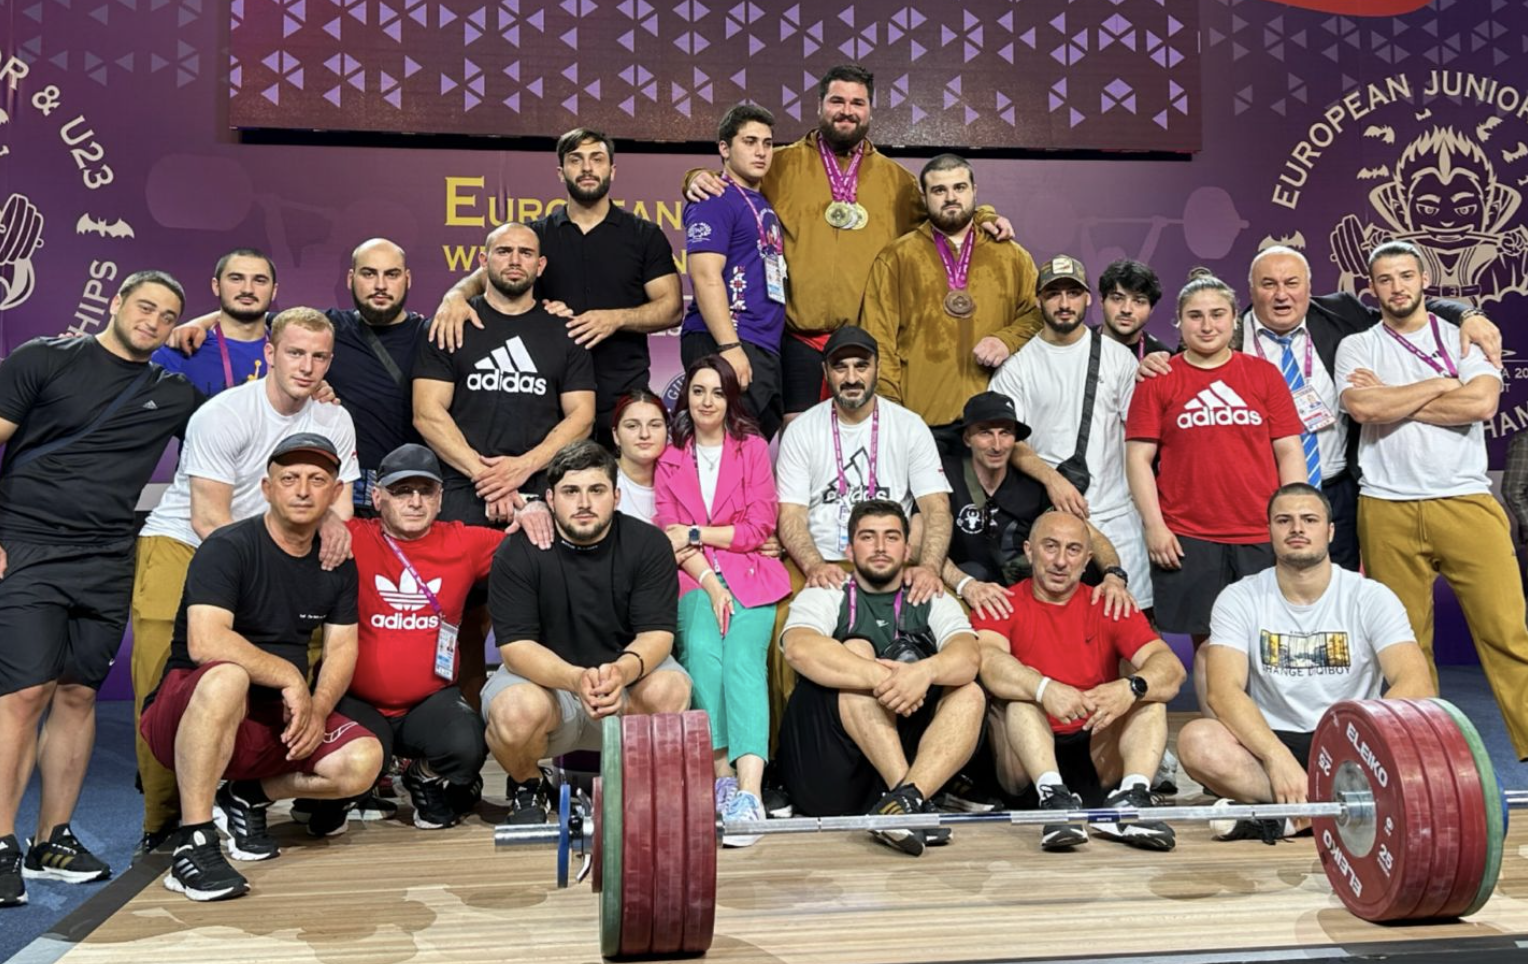 Weightlifting records for Ukraine's Konotop - and "a new chapter" for Georgia